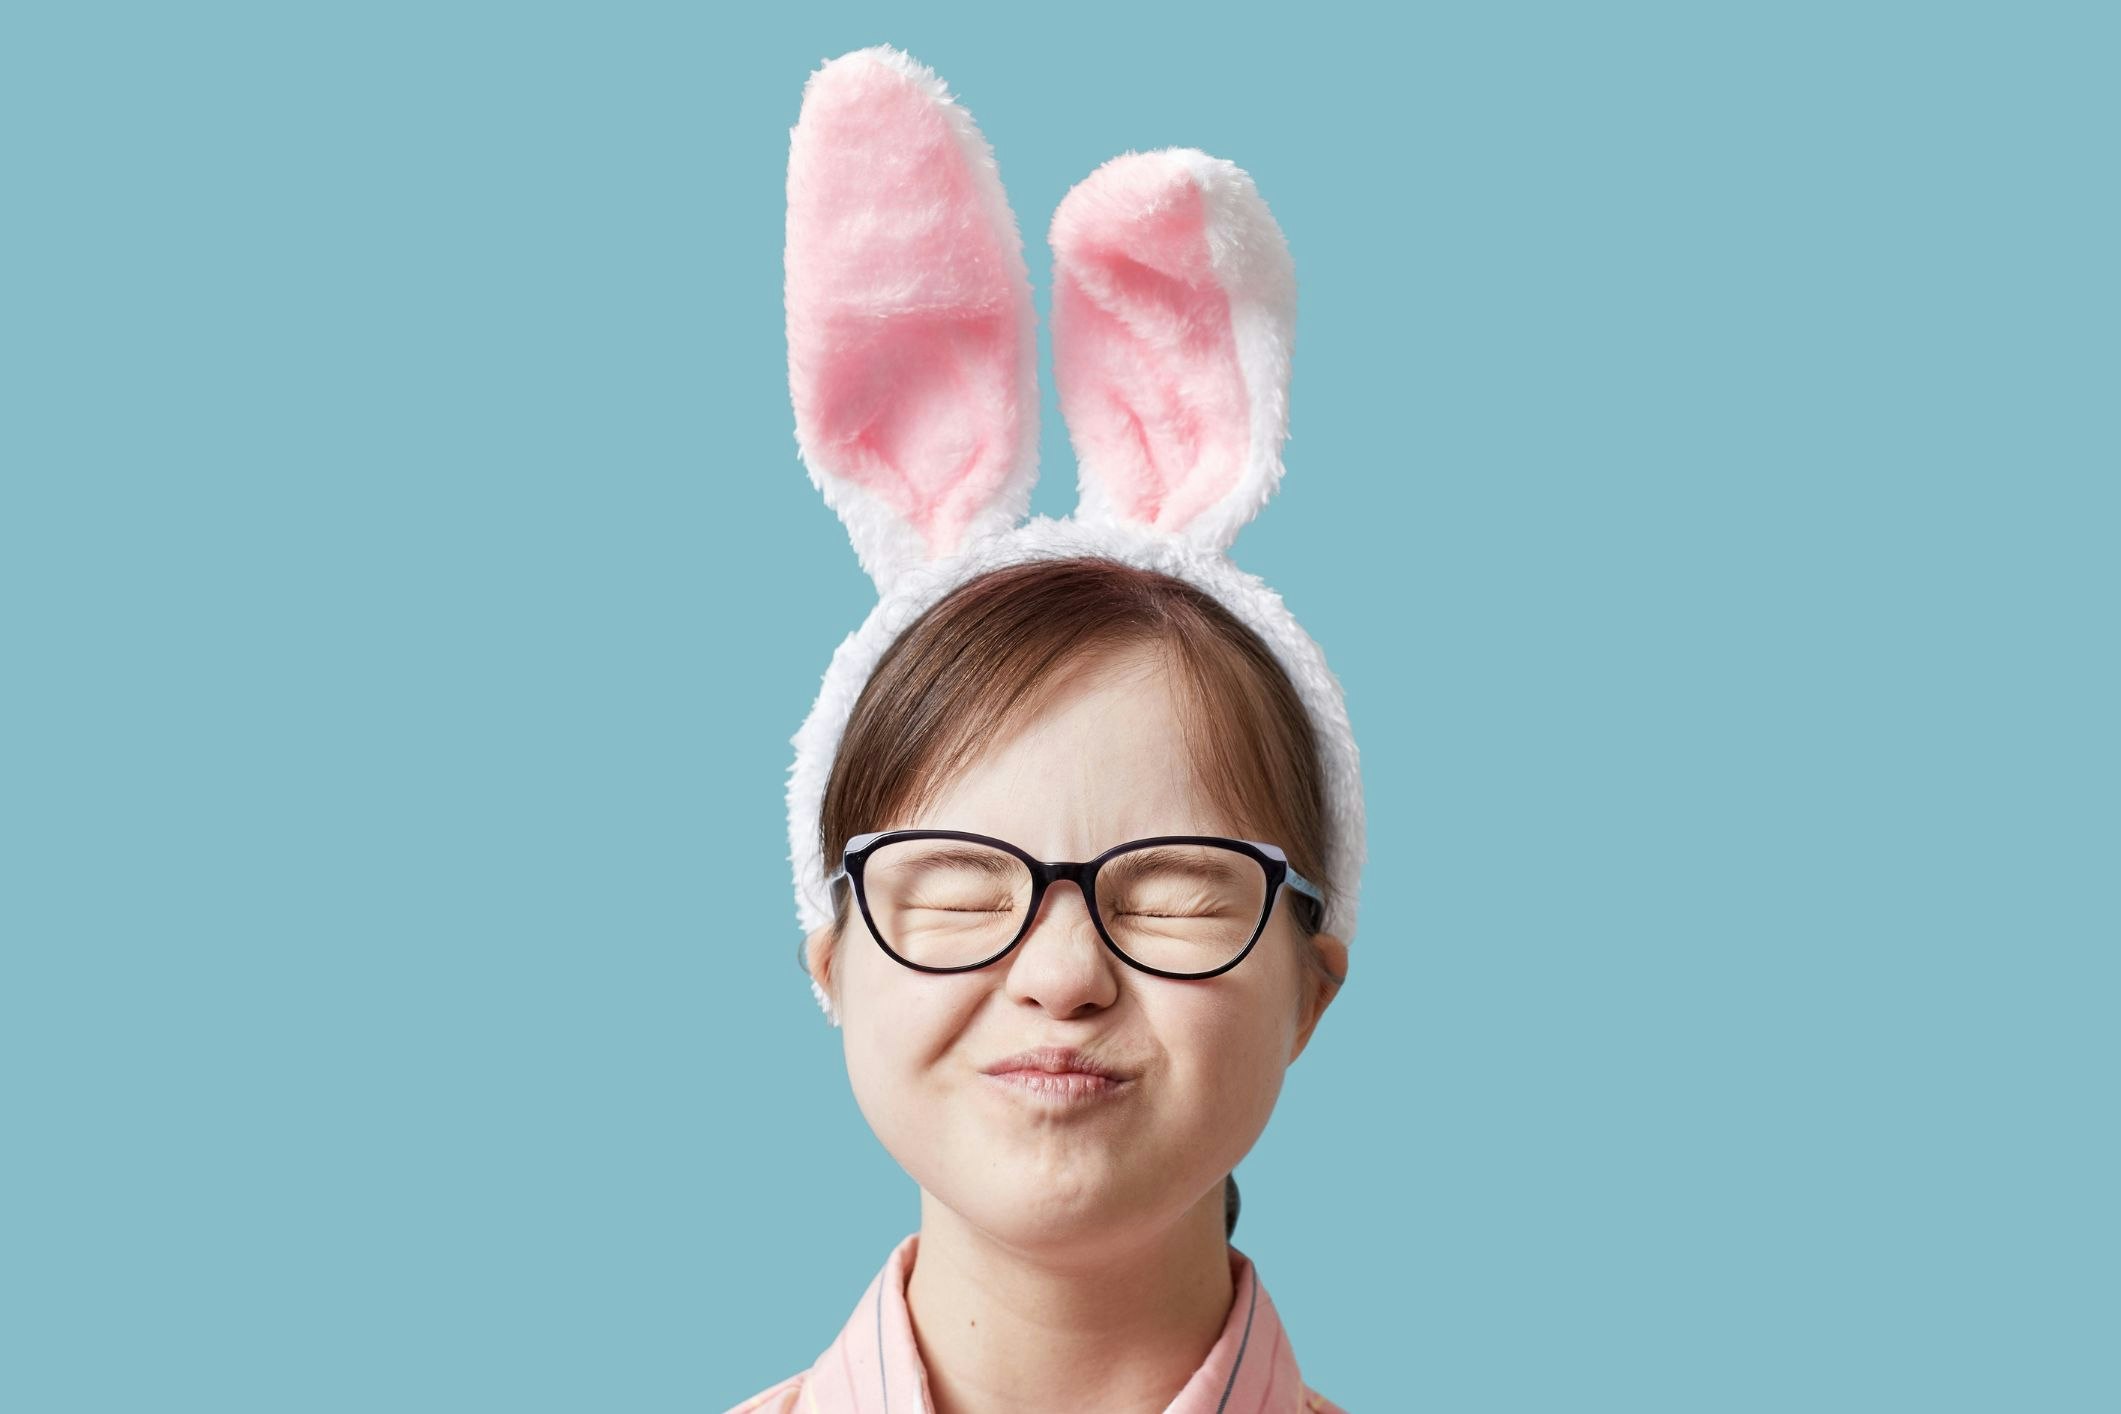 <p>Easter is a great time to spend with family and friends and making activities inclusive means that everyone can get involved. [Source: Shutterstock]</p>
